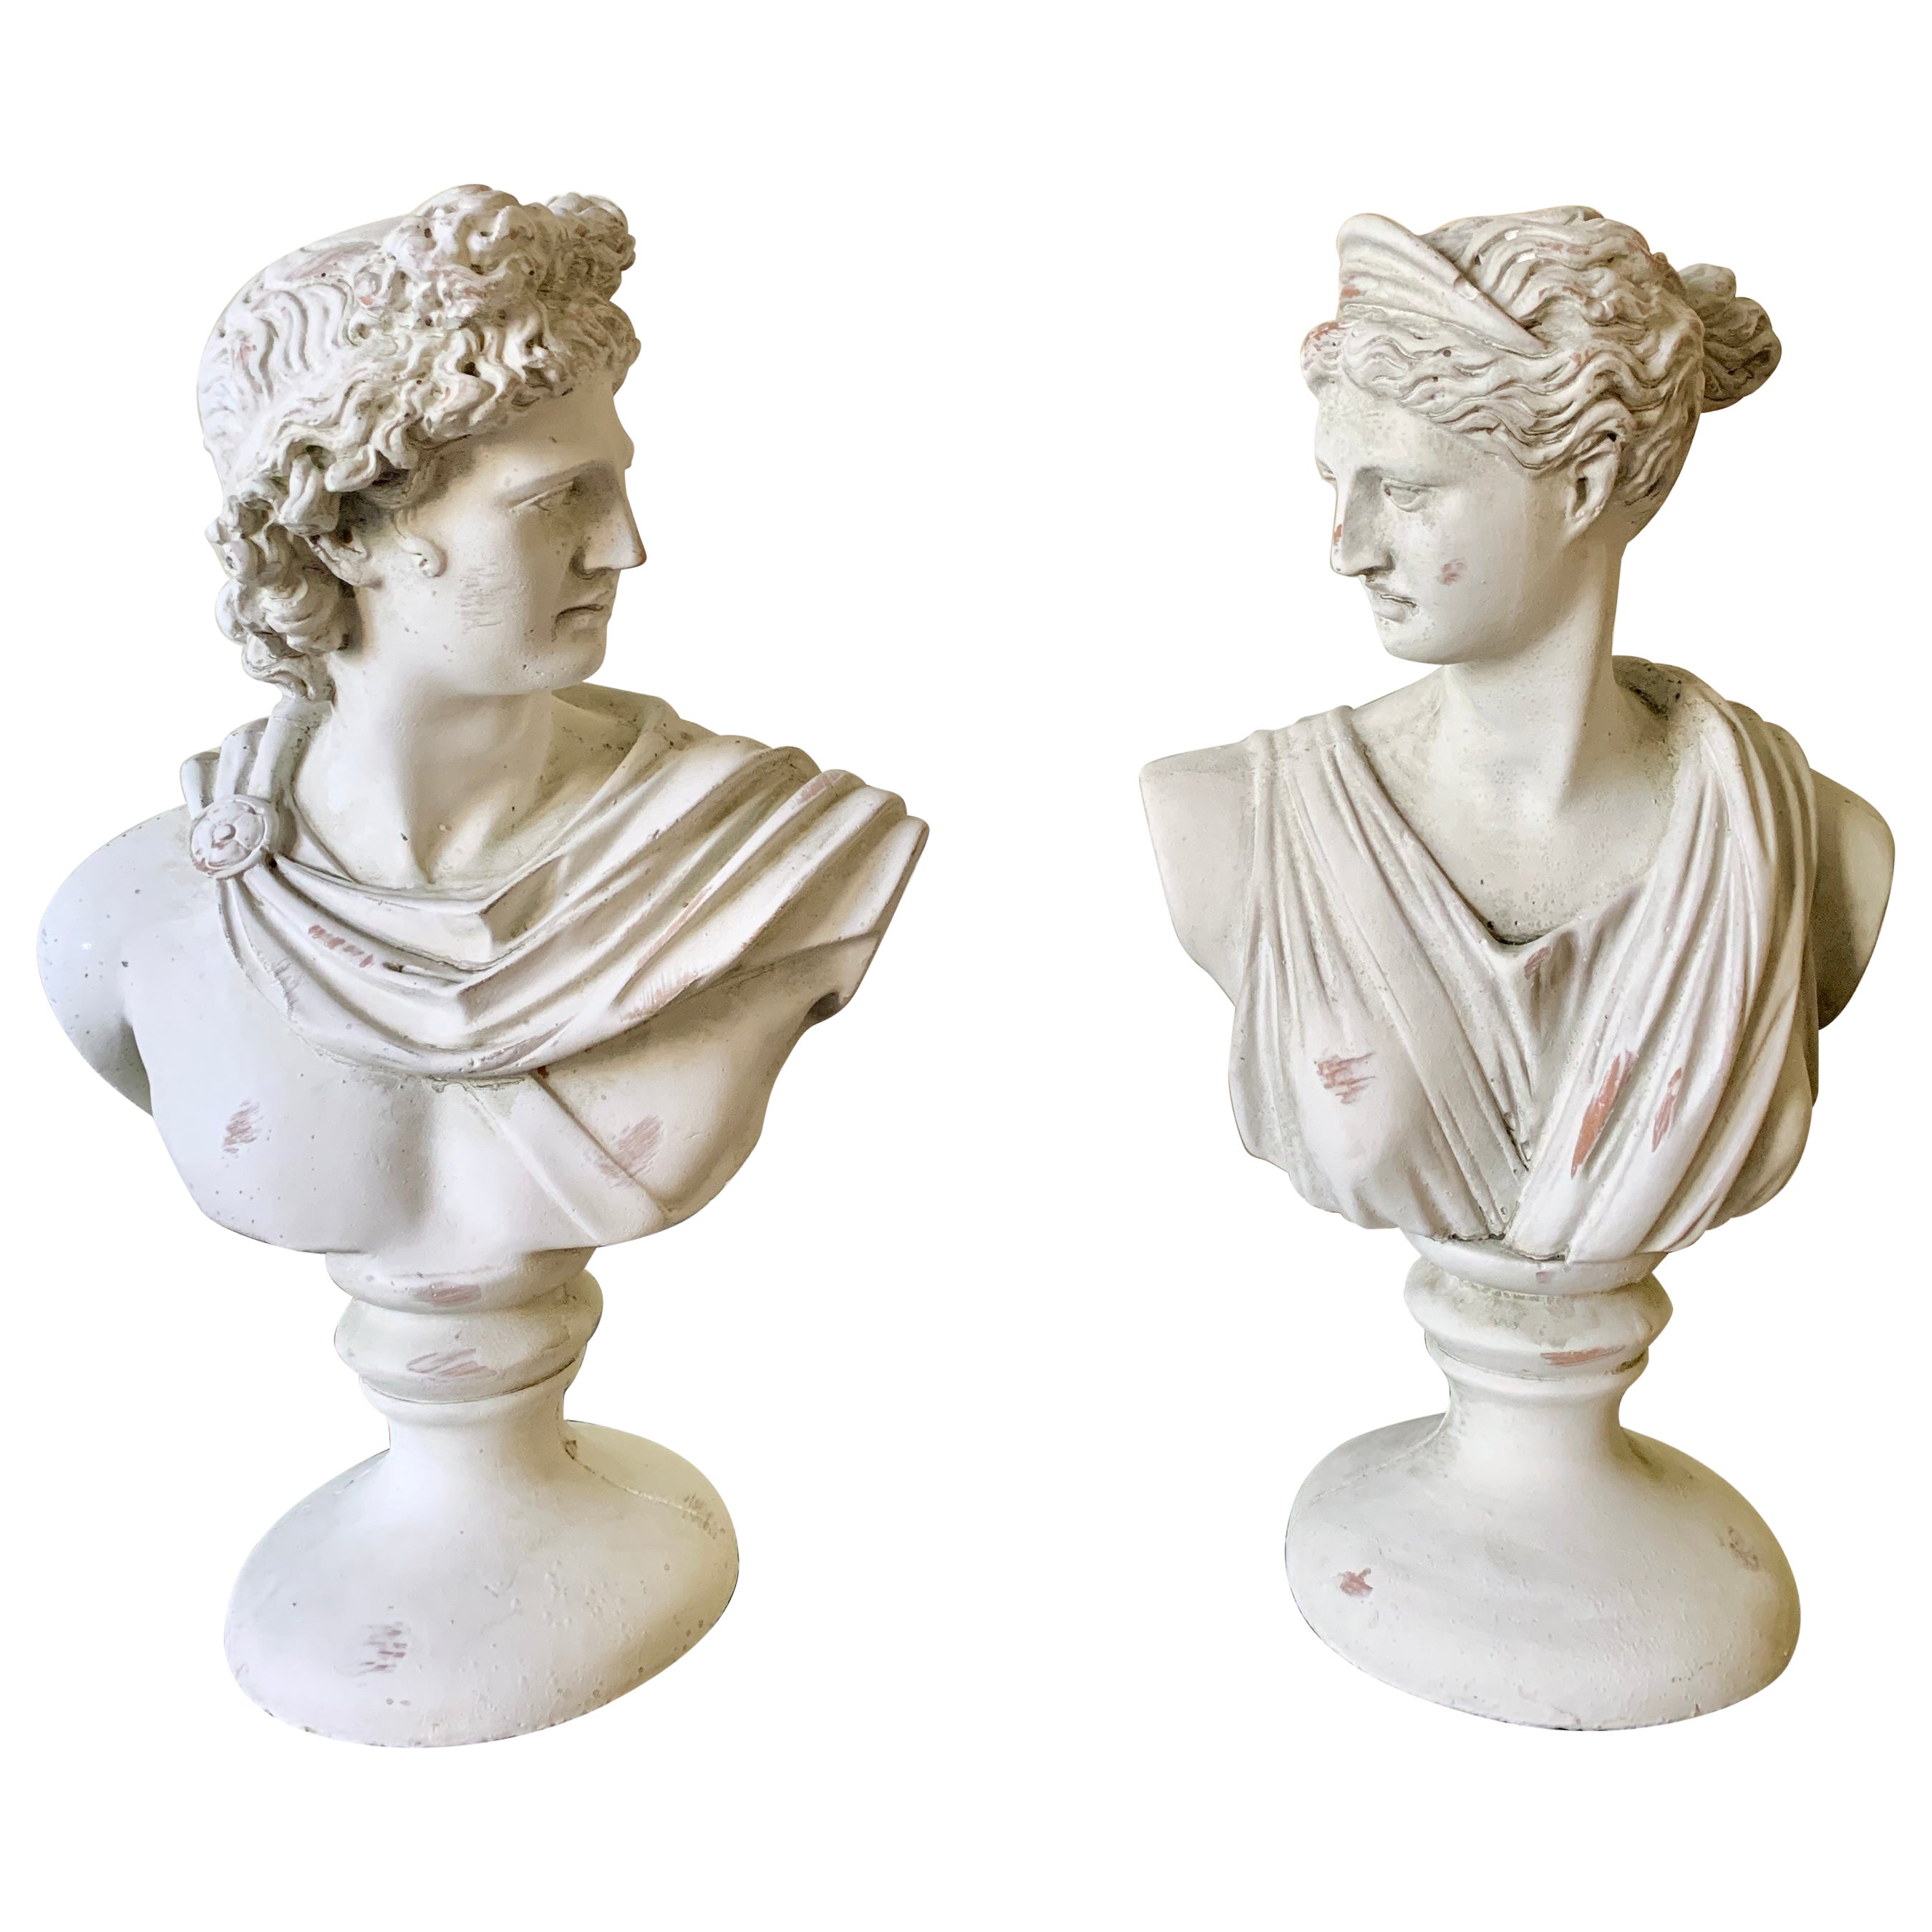 Neoclassical Plaster Busts of Diana and Apollo Belvedere Sculptures, Pair